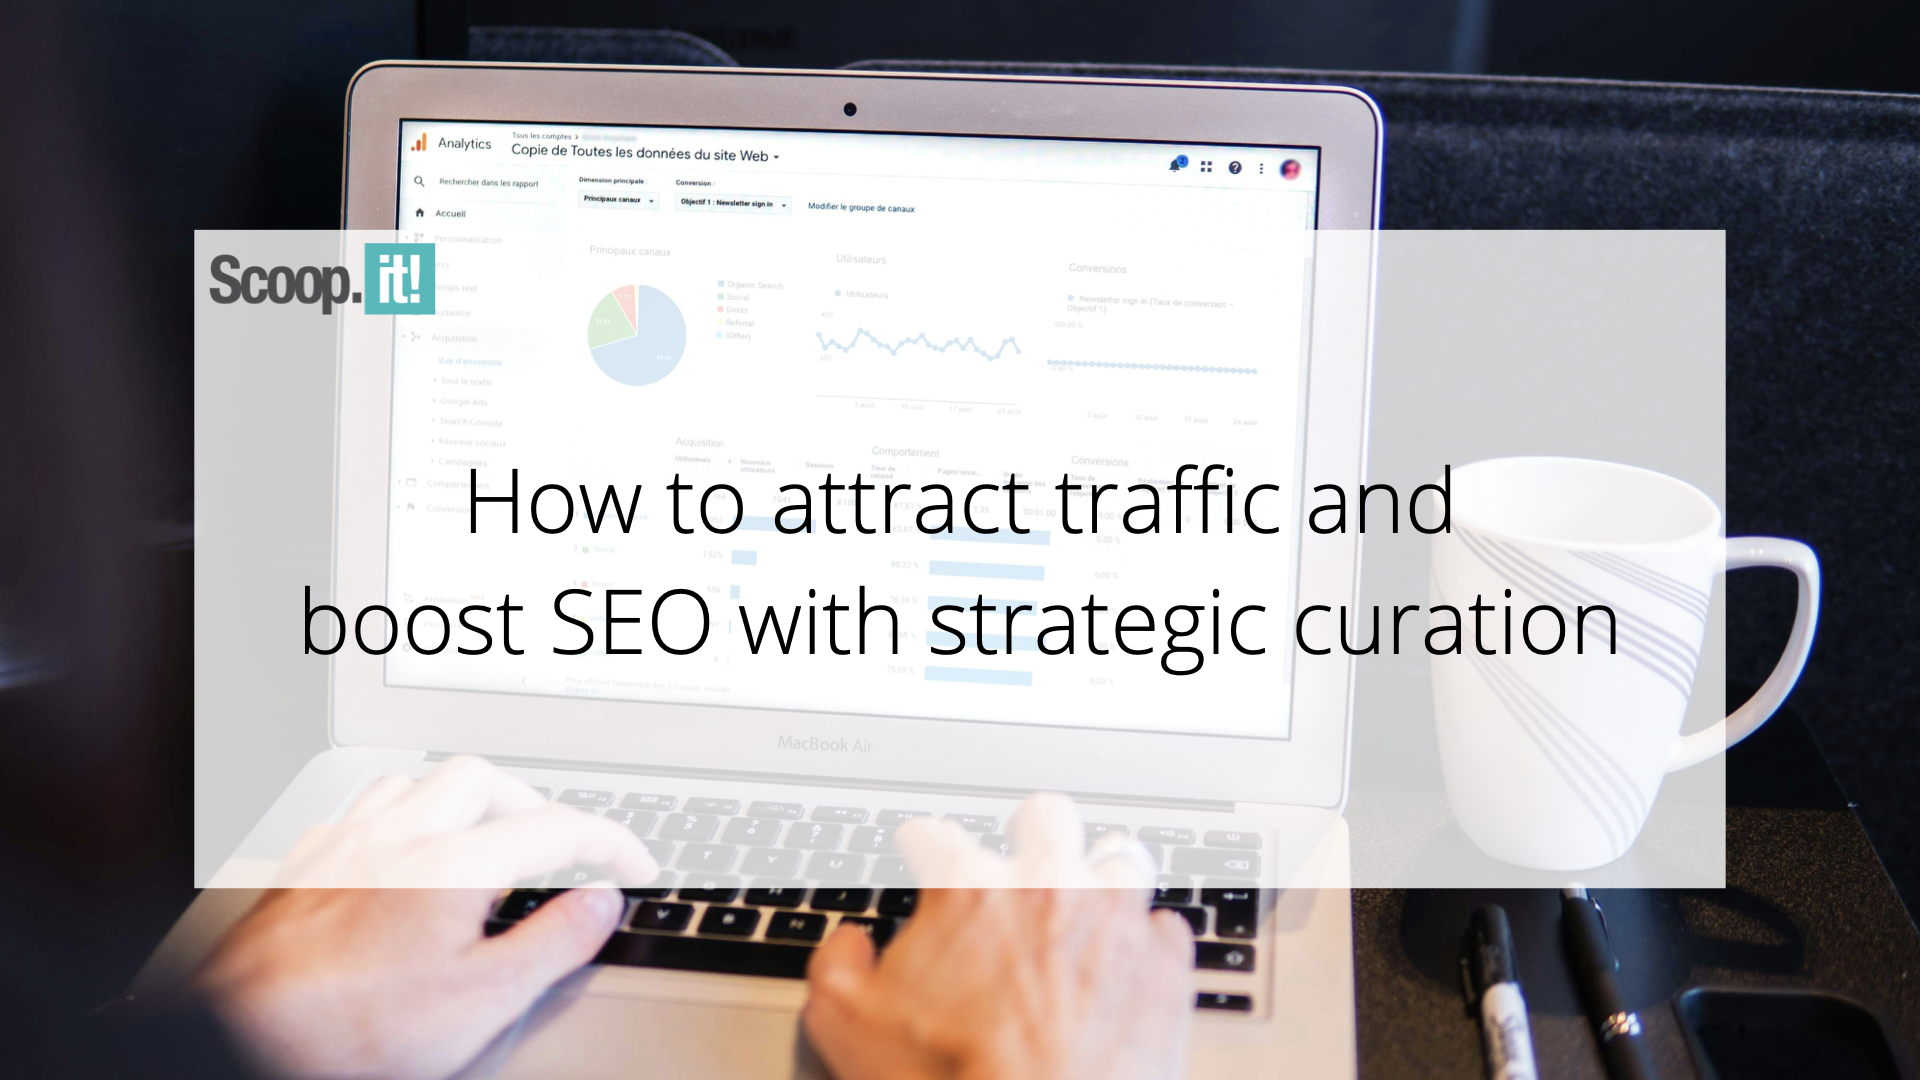 how-to-attract-traffic-and-boost-seo-with-strategic-curation-–-scoop.it-blog